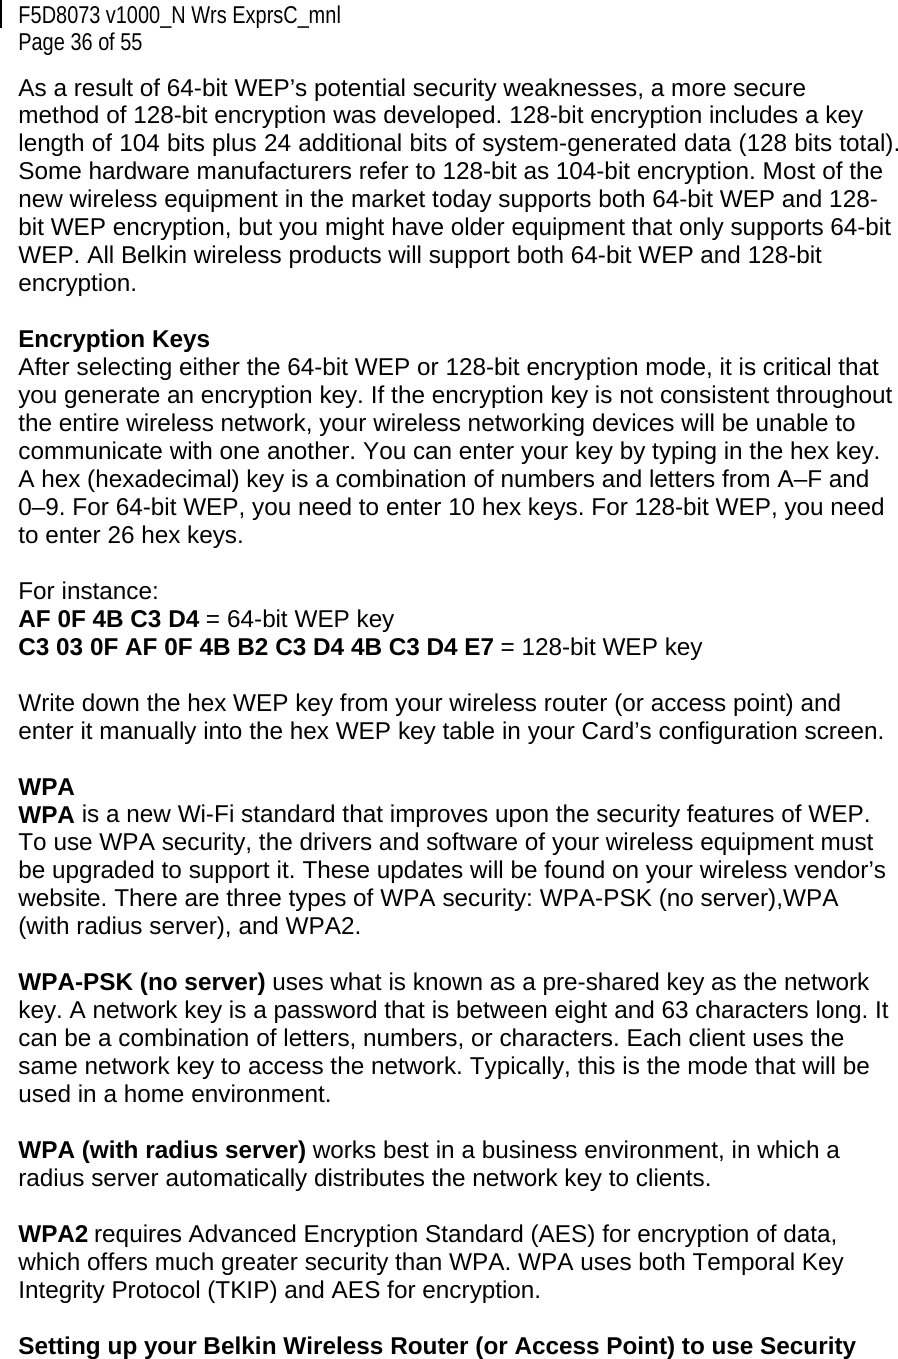 F5D8073 v1000_N Wrs ExprsC_mnl  Page 36 of 55 As a result of 64-bit WEP’s potential security weaknesses, a more secure method of 128-bit encryption was developed. 128-bit encryption includes a key length of 104 bits plus 24 additional bits of system-generated data (128 bits total). Some hardware manufacturers refer to 128-bit as 104-bit encryption. Most of the new wireless equipment in the market today supports both 64-bit WEP and 128-bit WEP encryption, but you might have older equipment that only supports 64-bit WEP. All Belkin wireless products will support both 64-bit WEP and 128-bit encryption.   Encryption Keys  After selecting either the 64-bit WEP or 128-bit encryption mode, it is critical that you generate an encryption key. If the encryption key is not consistent throughout the entire wireless network, your wireless networking devices will be unable to communicate with one another. You can enter your key by typing in the hex key. A hex (hexadecimal) key is a combination of numbers and letters from A–F and 0–9. For 64-bit WEP, you need to enter 10 hex keys. For 128-bit WEP, you need to enter 26 hex keys.   For instance:  AF 0F 4B C3 D4 = 64-bit WEP key  C3 03 0F AF 0F 4B B2 C3 D4 4B C3 D4 E7 = 128-bit WEP key   Write down the hex WEP key from your wireless router (or access point) and enter it manually into the hex WEP key table in your Card’s configuration screen.  WPA  WPA is a new Wi-Fi standard that improves upon the security features of WEP. To use WPA security, the drivers and software of your wireless equipment must be upgraded to support it. These updates will be found on your wireless vendor’s website. There are three types of WPA security: WPA-PSK (no server),WPA (with radius server), and WPA2.  WPA-PSK (no server) uses what is known as a pre-shared key as the network key. A network key is a password that is between eight and 63 characters long. It can be a combination of letters, numbers, or characters. Each client uses the same network key to access the network. Typically, this is the mode that will be used in a home environment.   WPA (with radius server) works best in a business environment, in which a radius server automatically distributes the network key to clients.   WPA2 requires Advanced Encryption Standard (AES) for encryption of data, which offers much greater security than WPA. WPA uses both Temporal Key Integrity Protocol (TKIP) and AES for encryption.  Setting up your Belkin Wireless Router (or Access Point) to use Security 